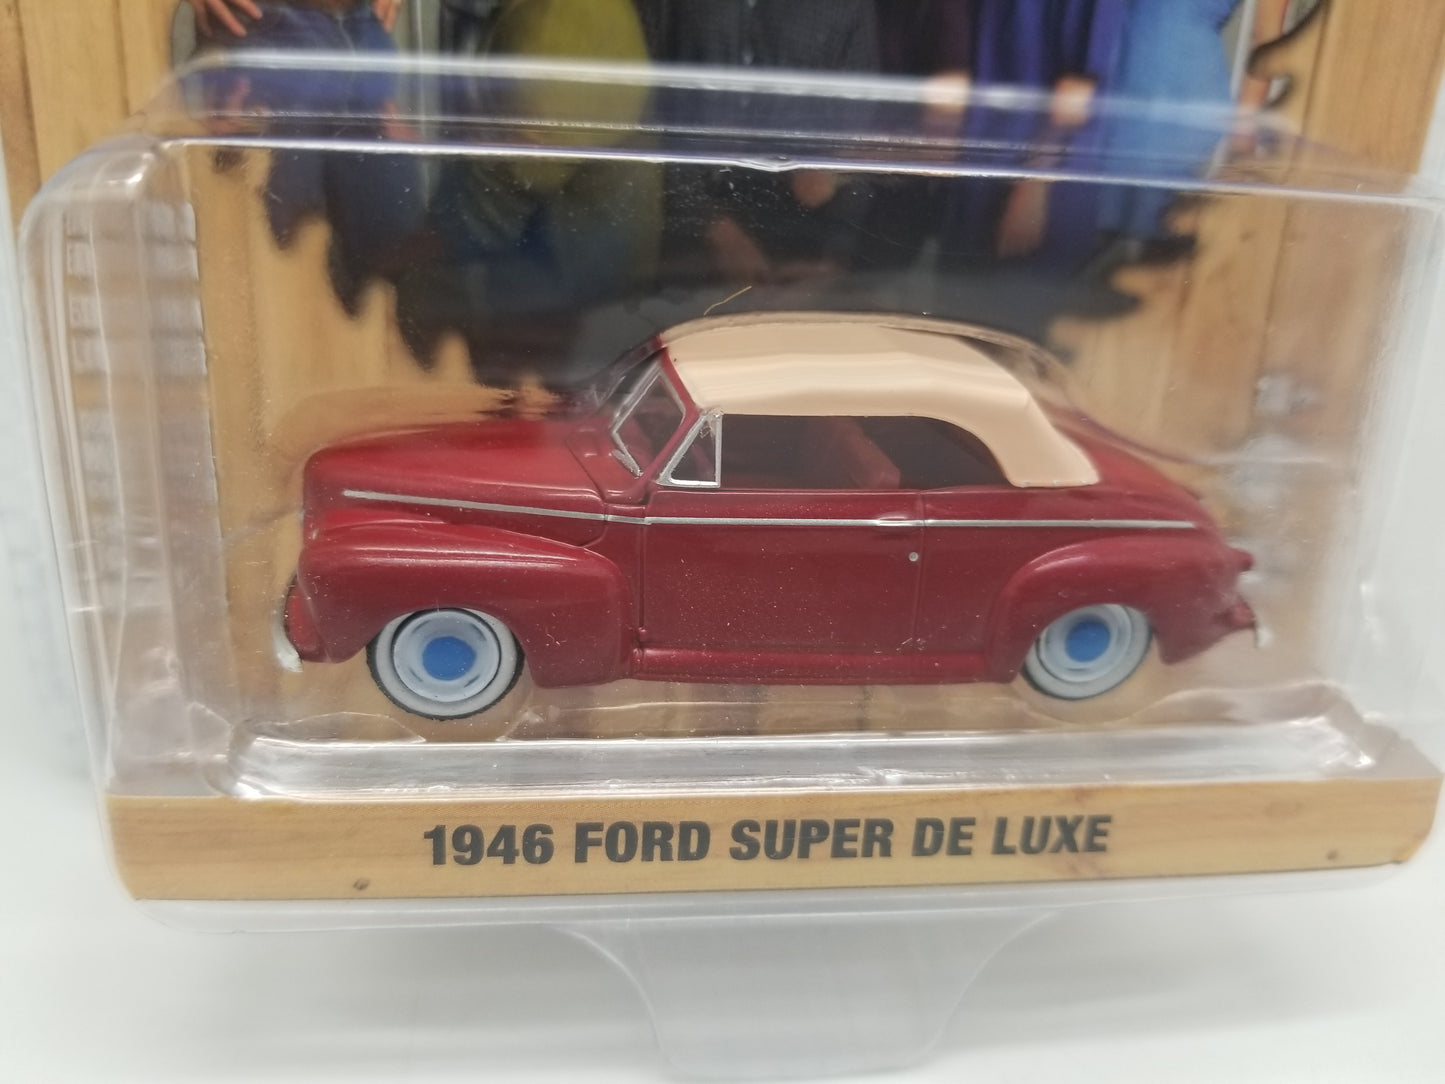 GL CHASE - 1946 Ford Super De Luxe - HOME IMPROVEMENT